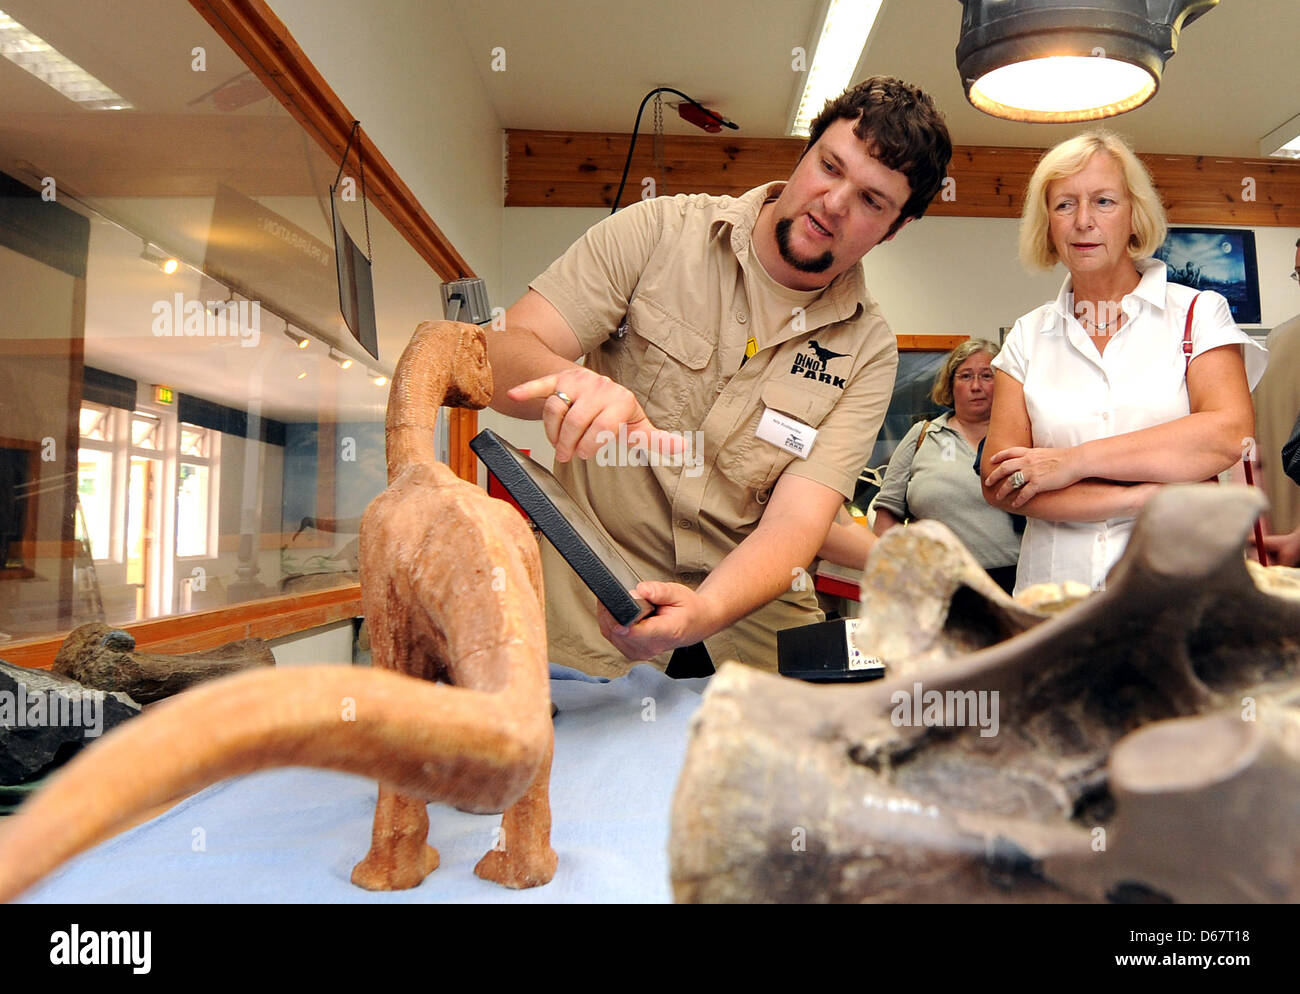 Minister of Science of Lower Saxony Johanna Wanka (CDU, R) has chief taxidermist Nils Knoetschke explain a Dinosaur model at the Dinosaur Open Air Museum in Muenchehagen, Germany, 28 June 2012. A complete skeleton of a Europasaurus is seen in the background. Wanka visited several Dinosaur excavation sites in Lower Saxony. Photo: Holger Hollemann Stock Photo